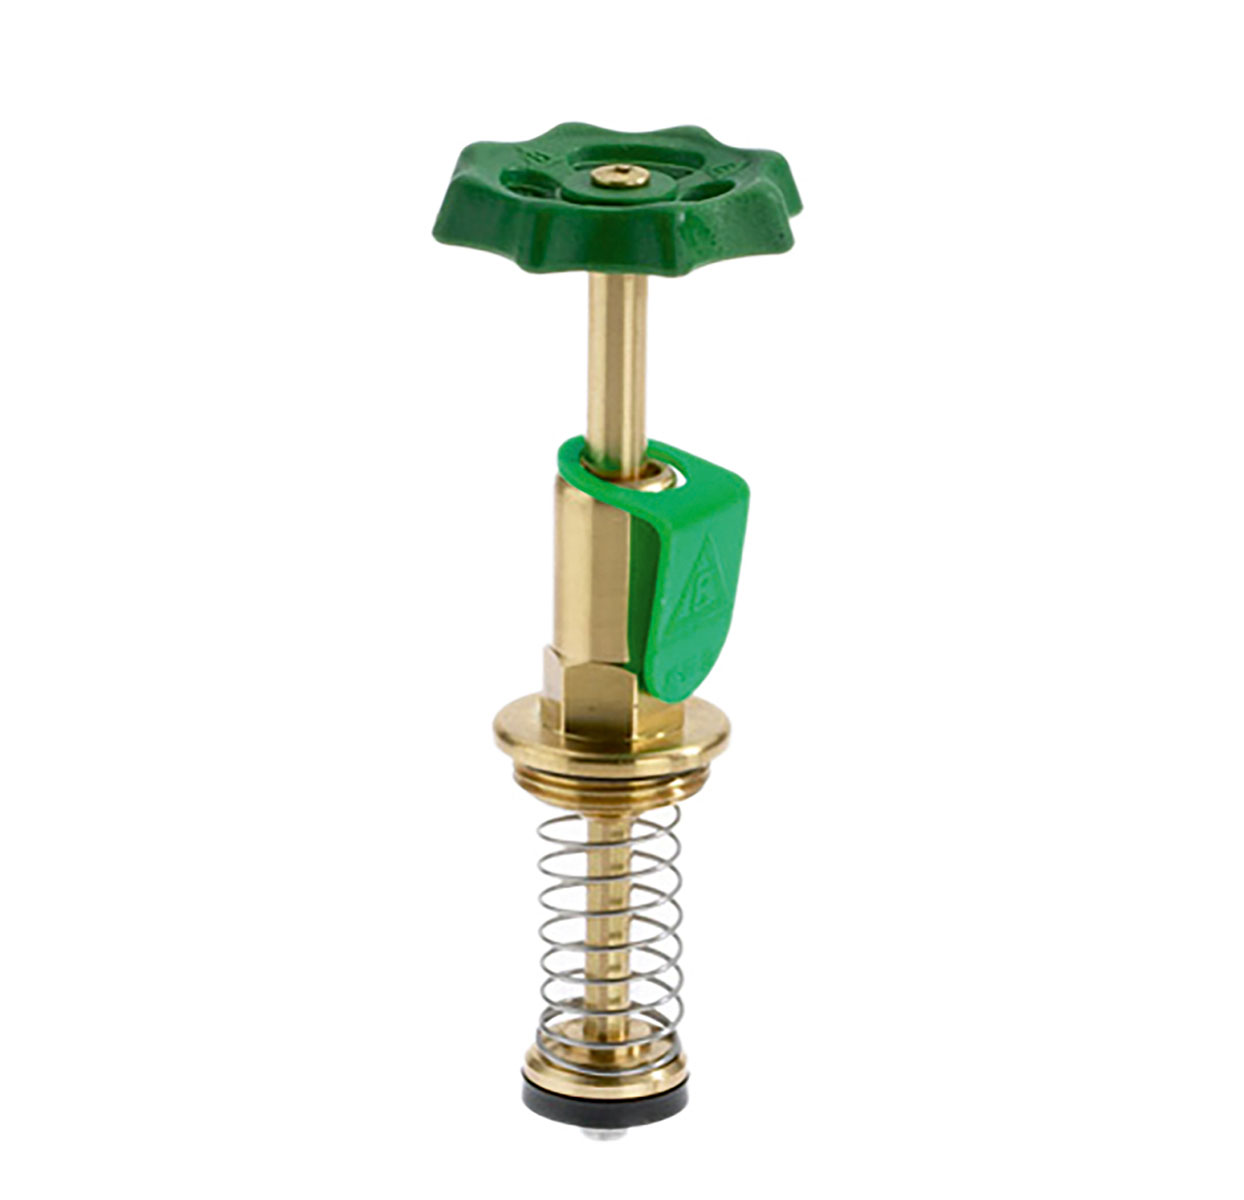 1213200 - Brass Upper-part with grease chamber for Combined Free-flow and Backflow-preventer valves, risinge Spindel